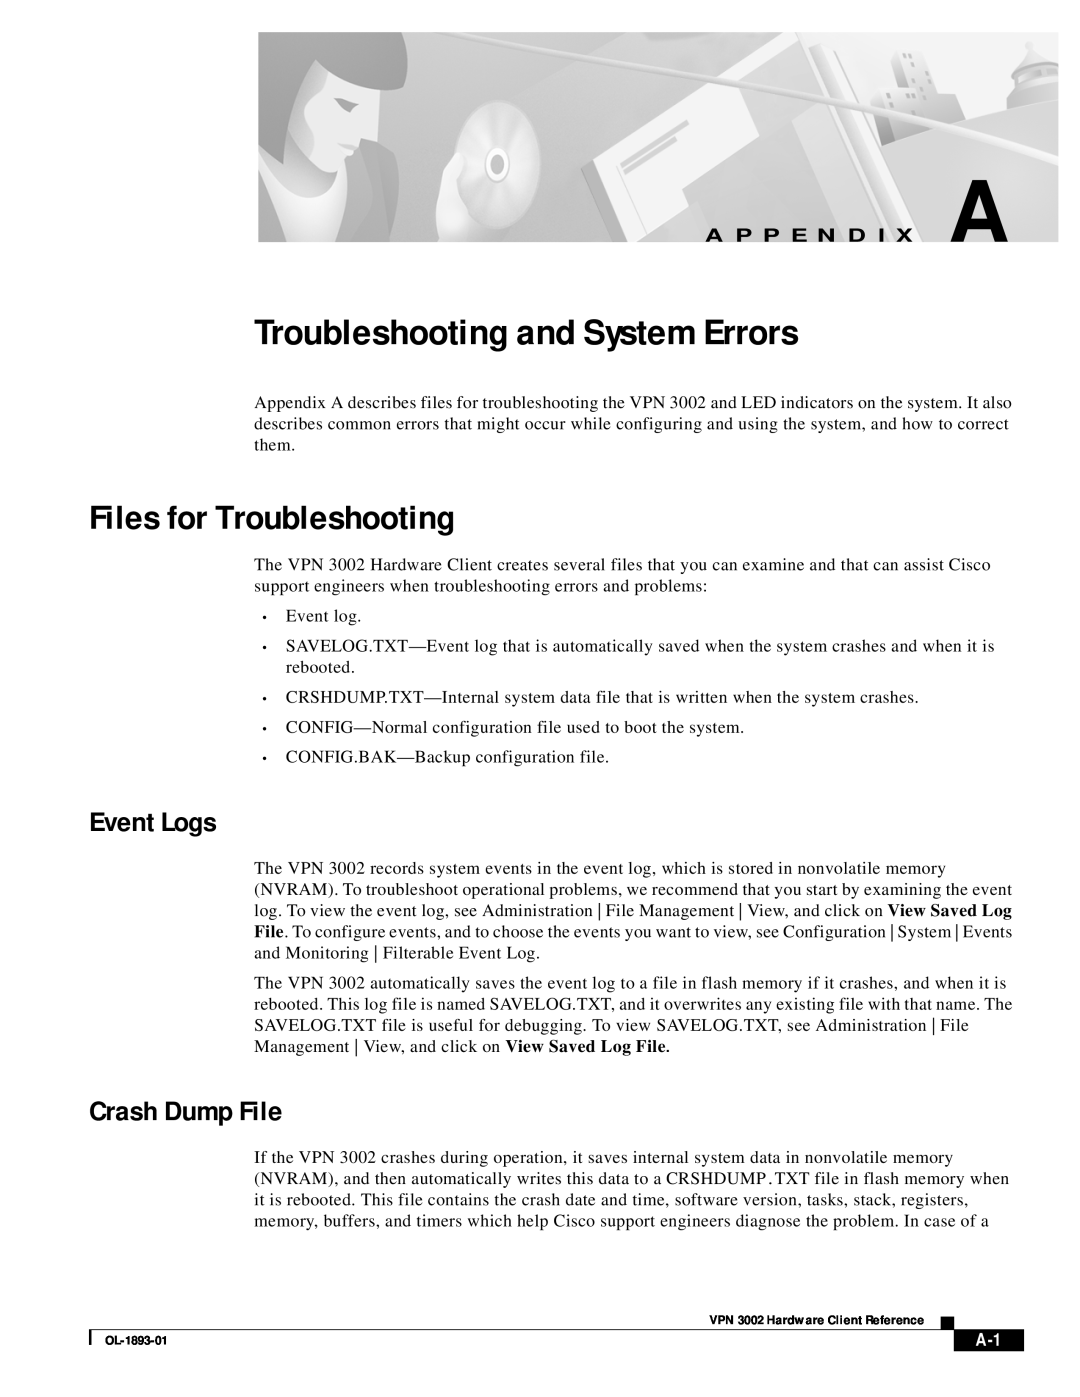 Cisco Systems VPN 3002 manual Troubleshooting and System Errors, Files for Troubleshooting, Event Logs, Crash Dump File 